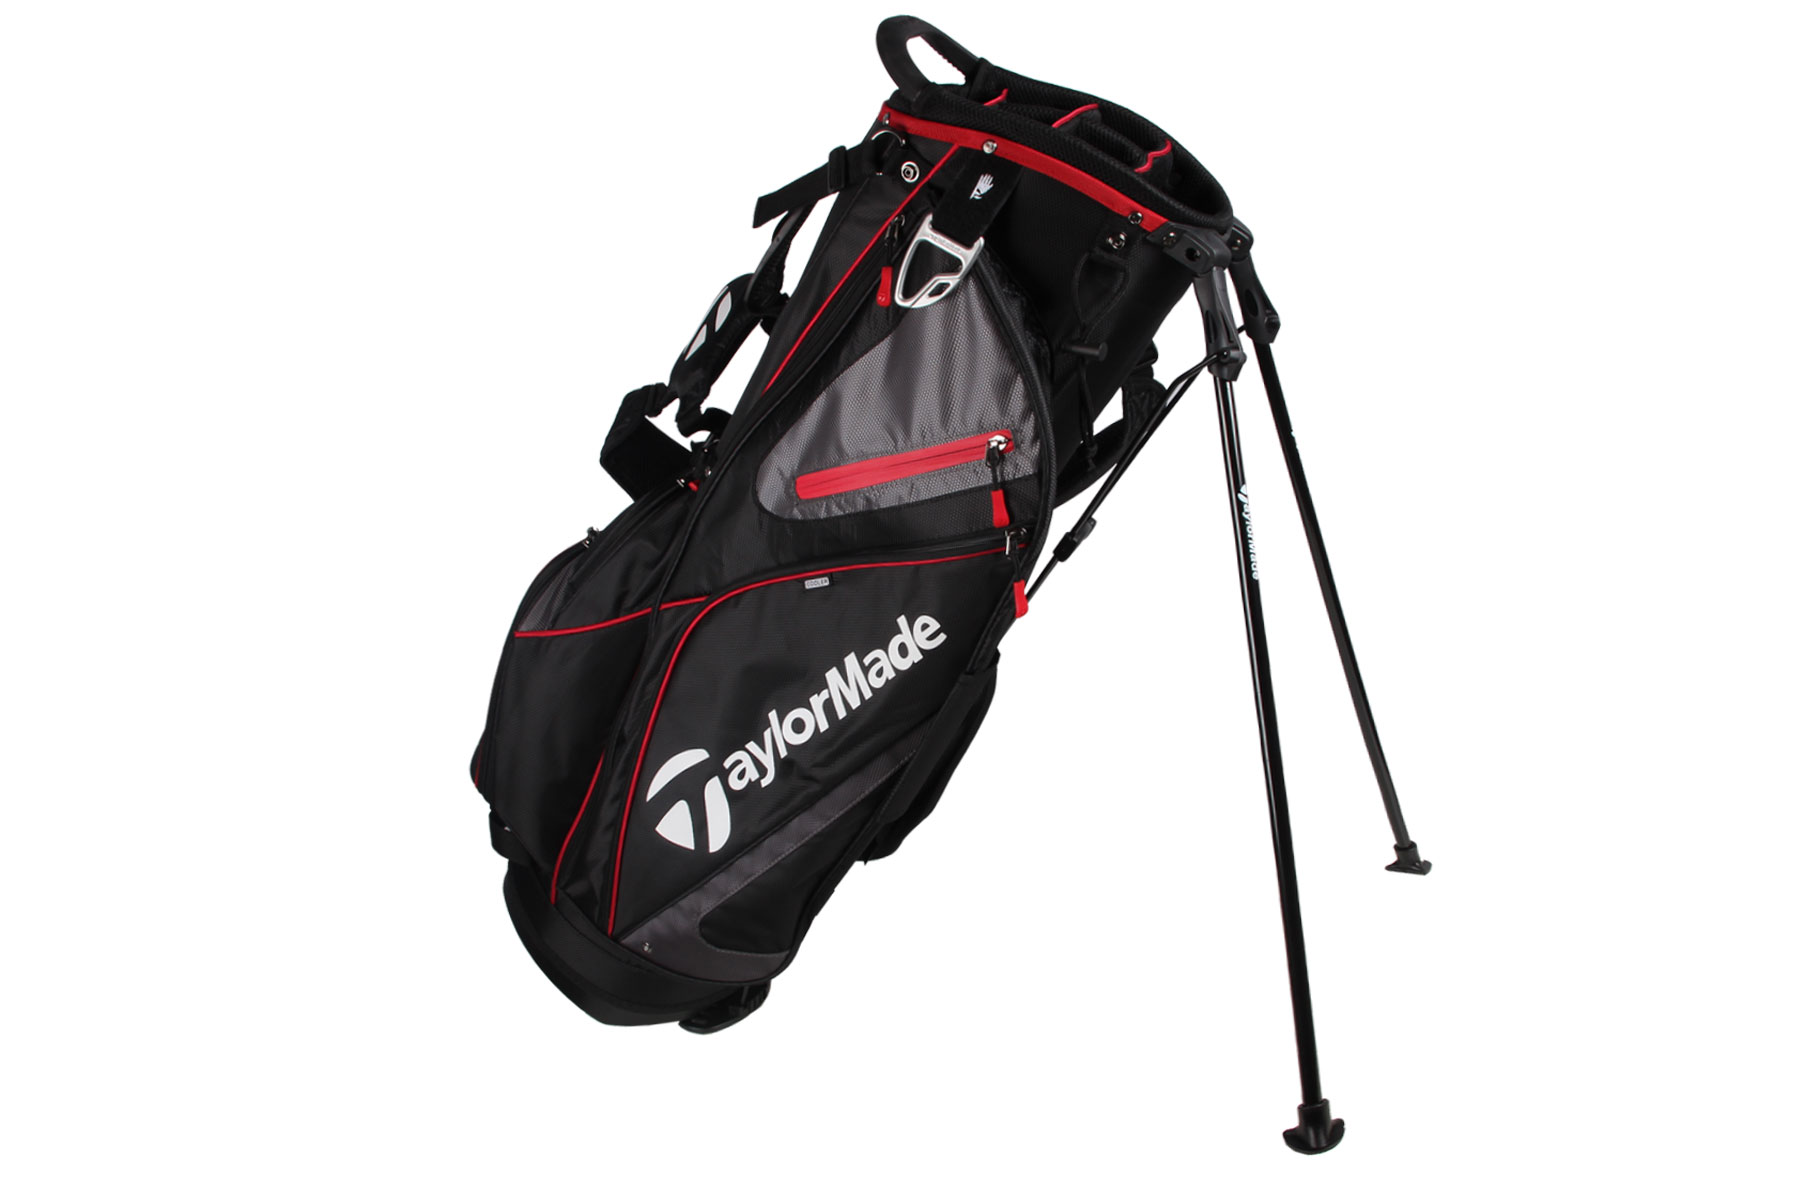 Used Golf Bags For Sale Uk | Jaguar Clubs of North America